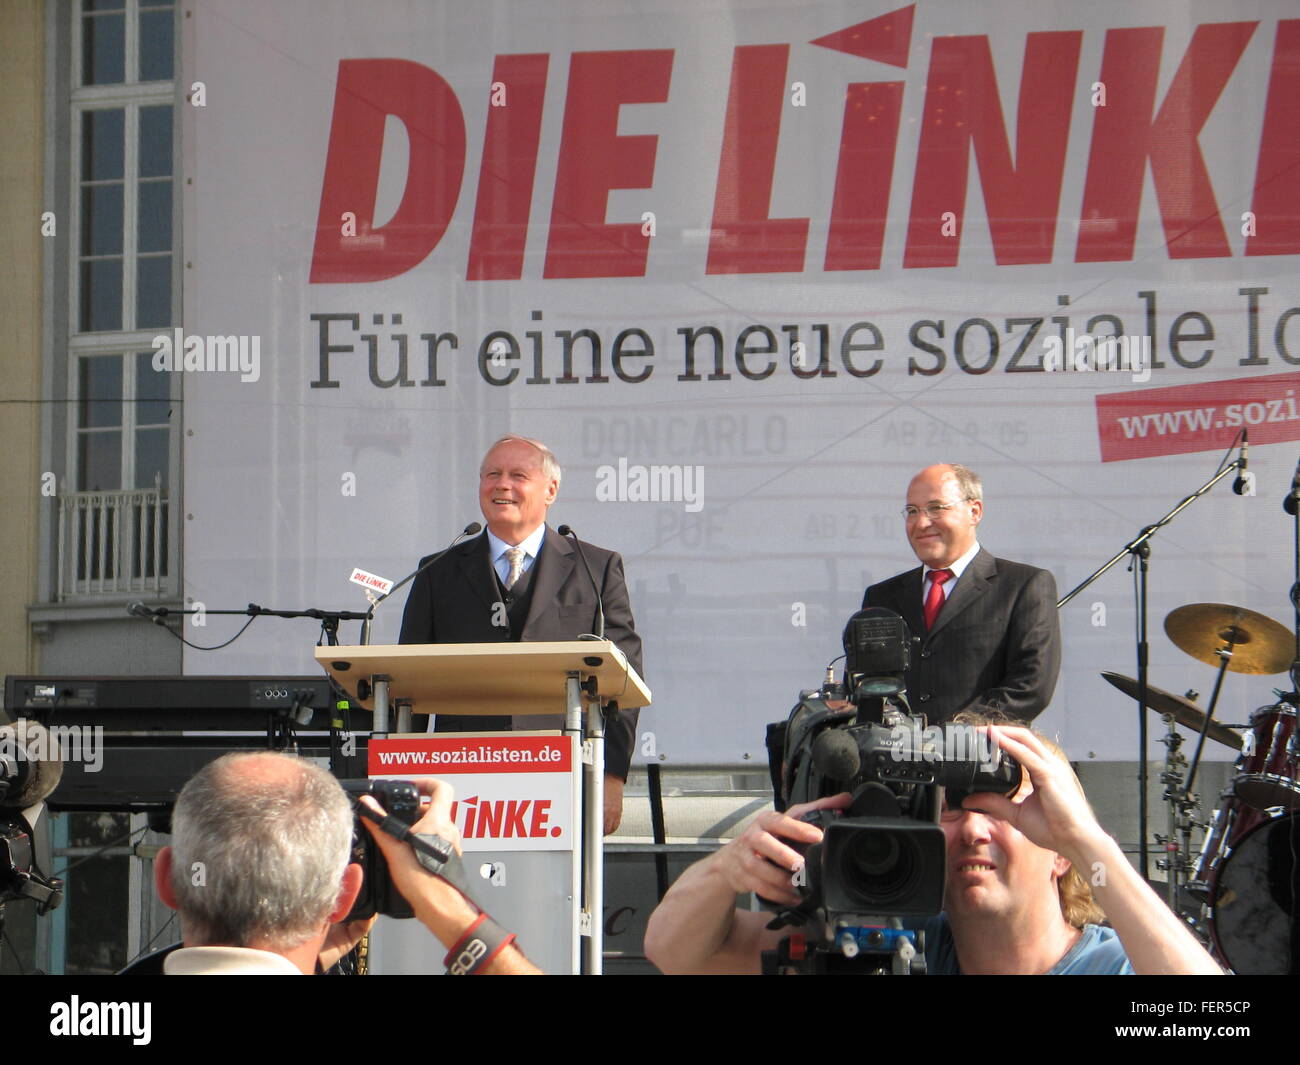 Oskar Lafontaine and Gregor Gysi from the German Party 'Die Linke', at the election 2005, in Saarbrücken, Germany Stock Photo